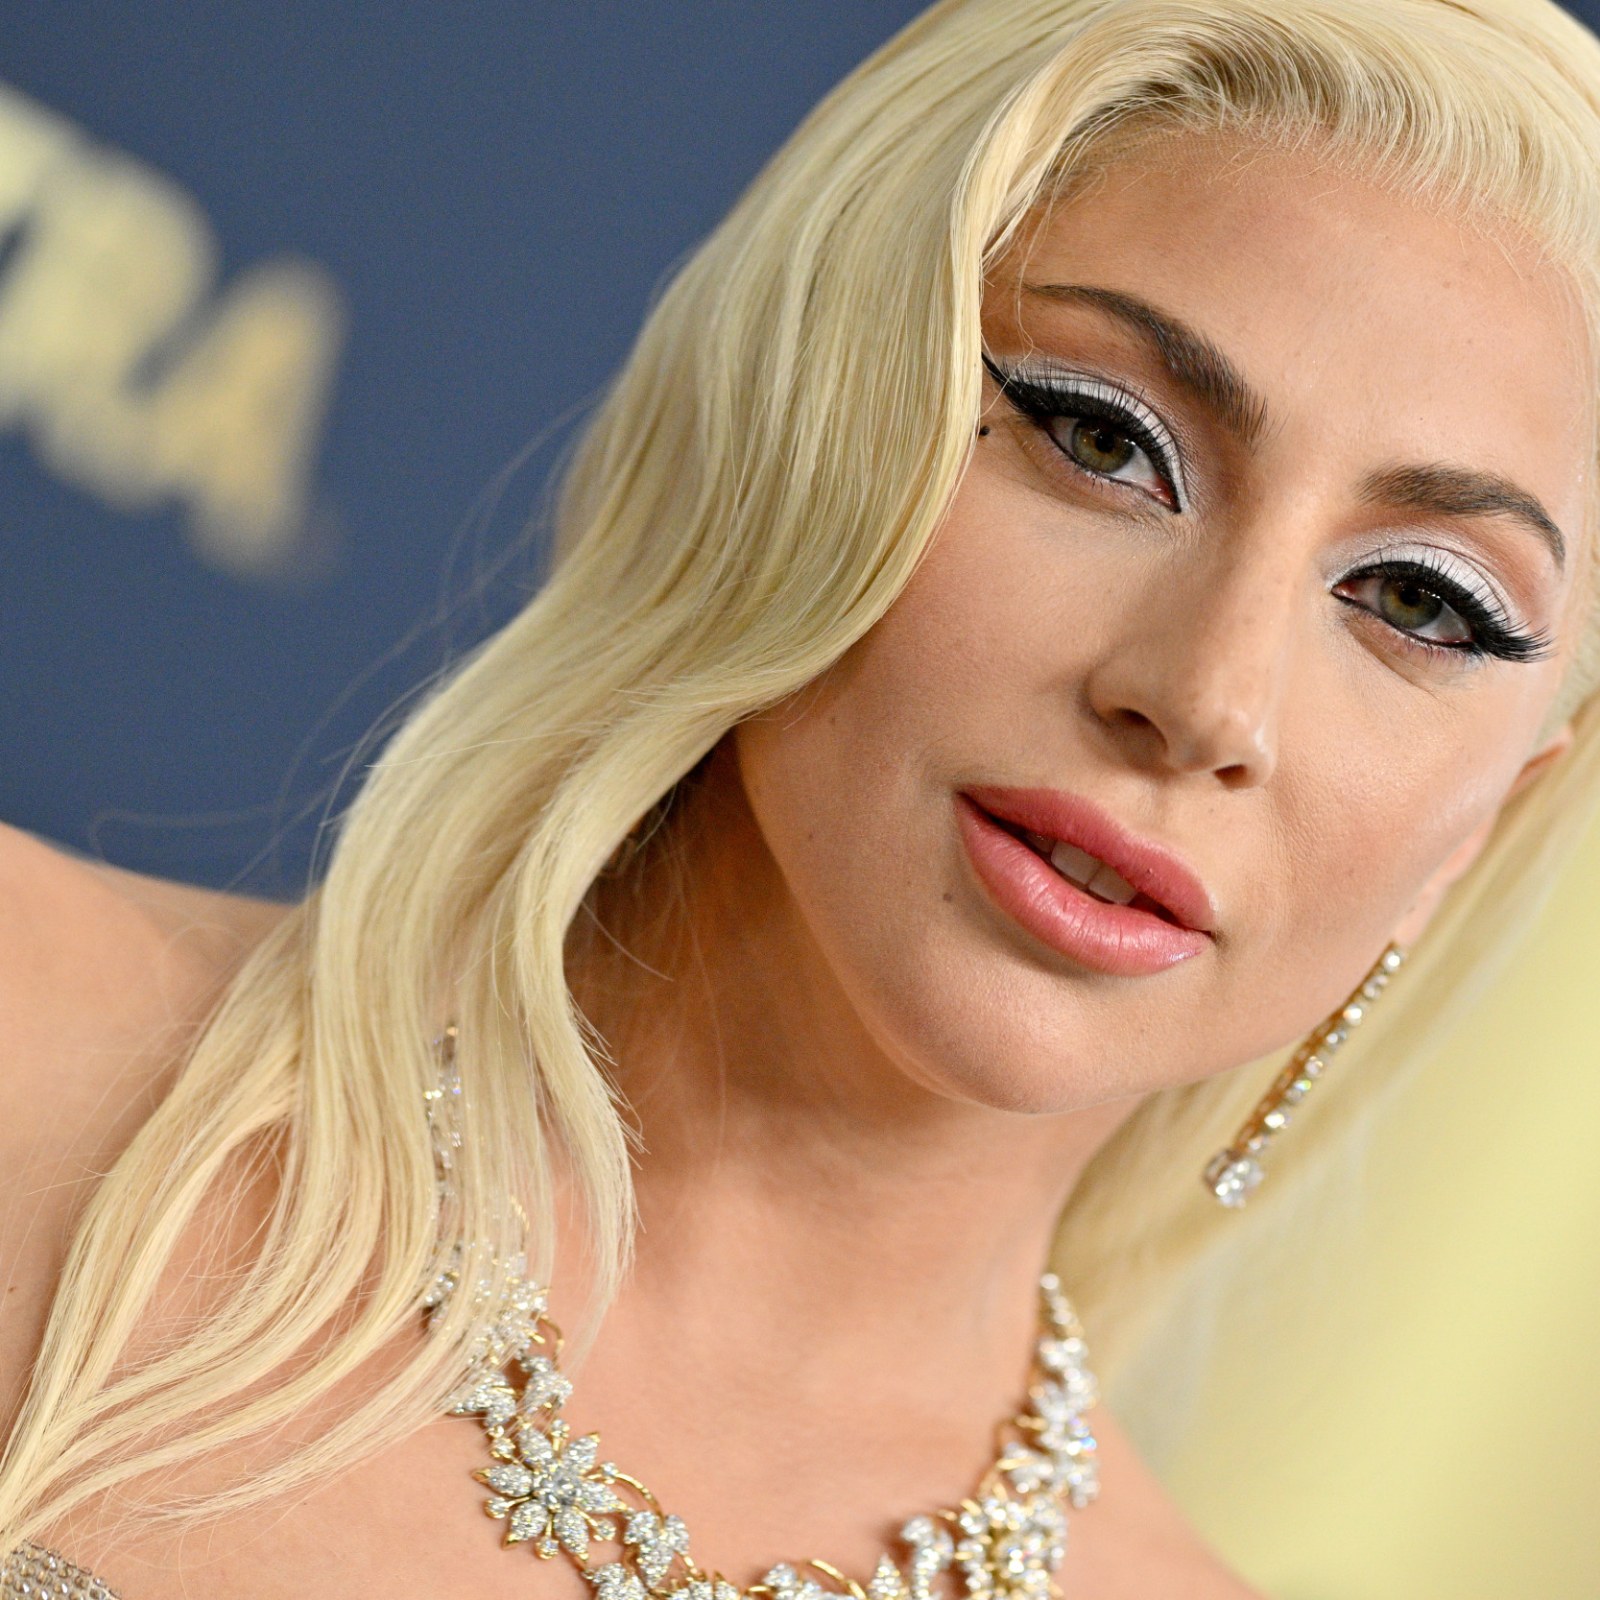 Lady Gaga Slammed For Appearing In Ad Campaign For Migraine Drug